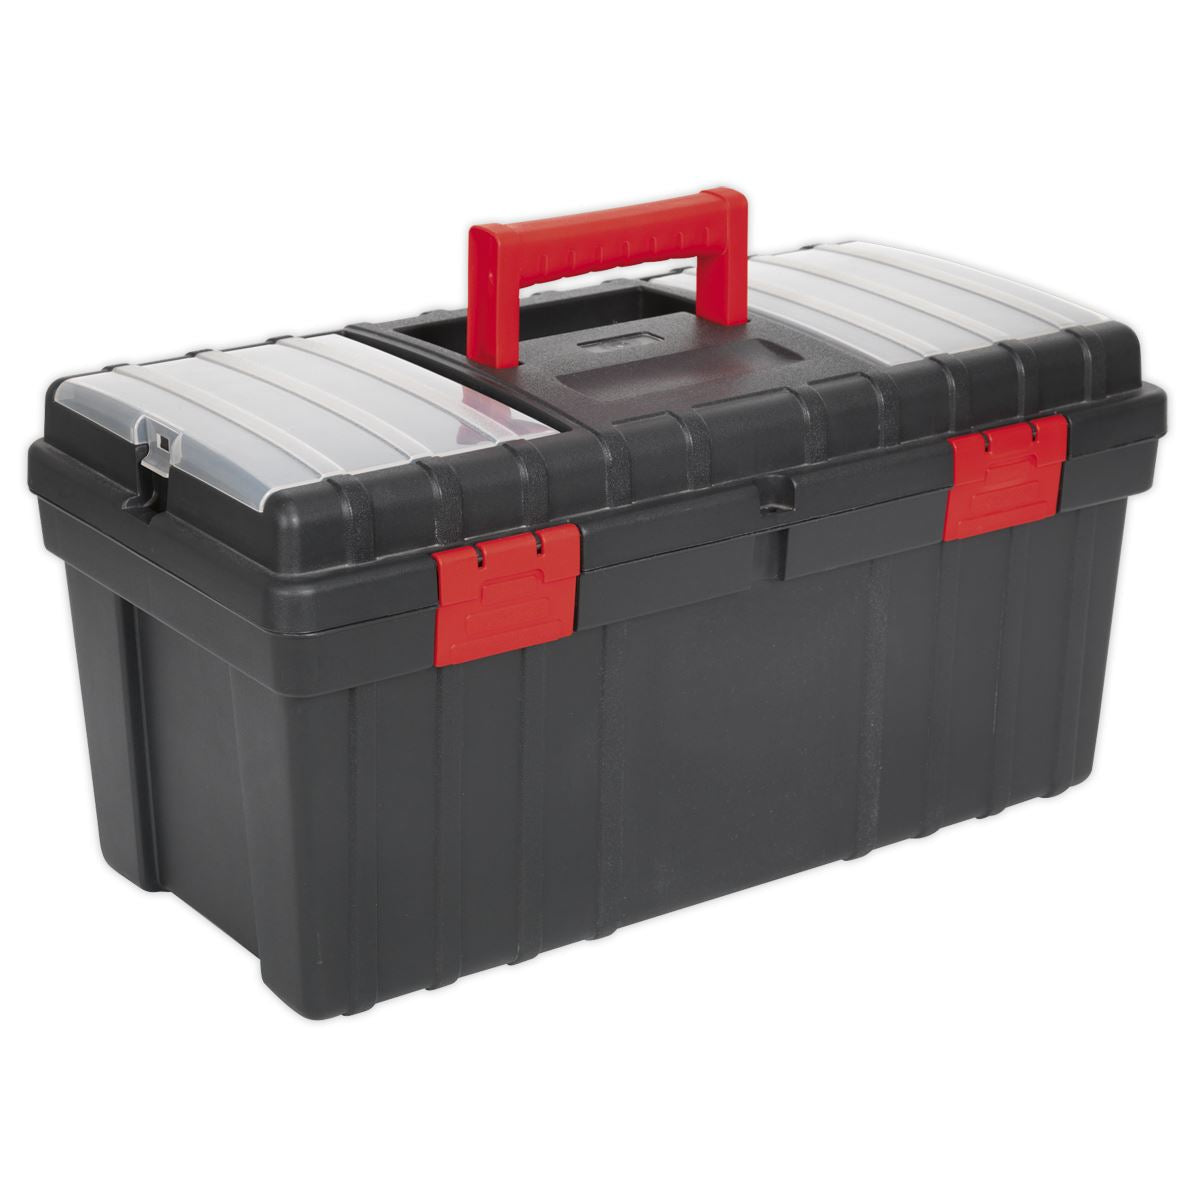 Sealey Toolbox 490mm with Tote Tray